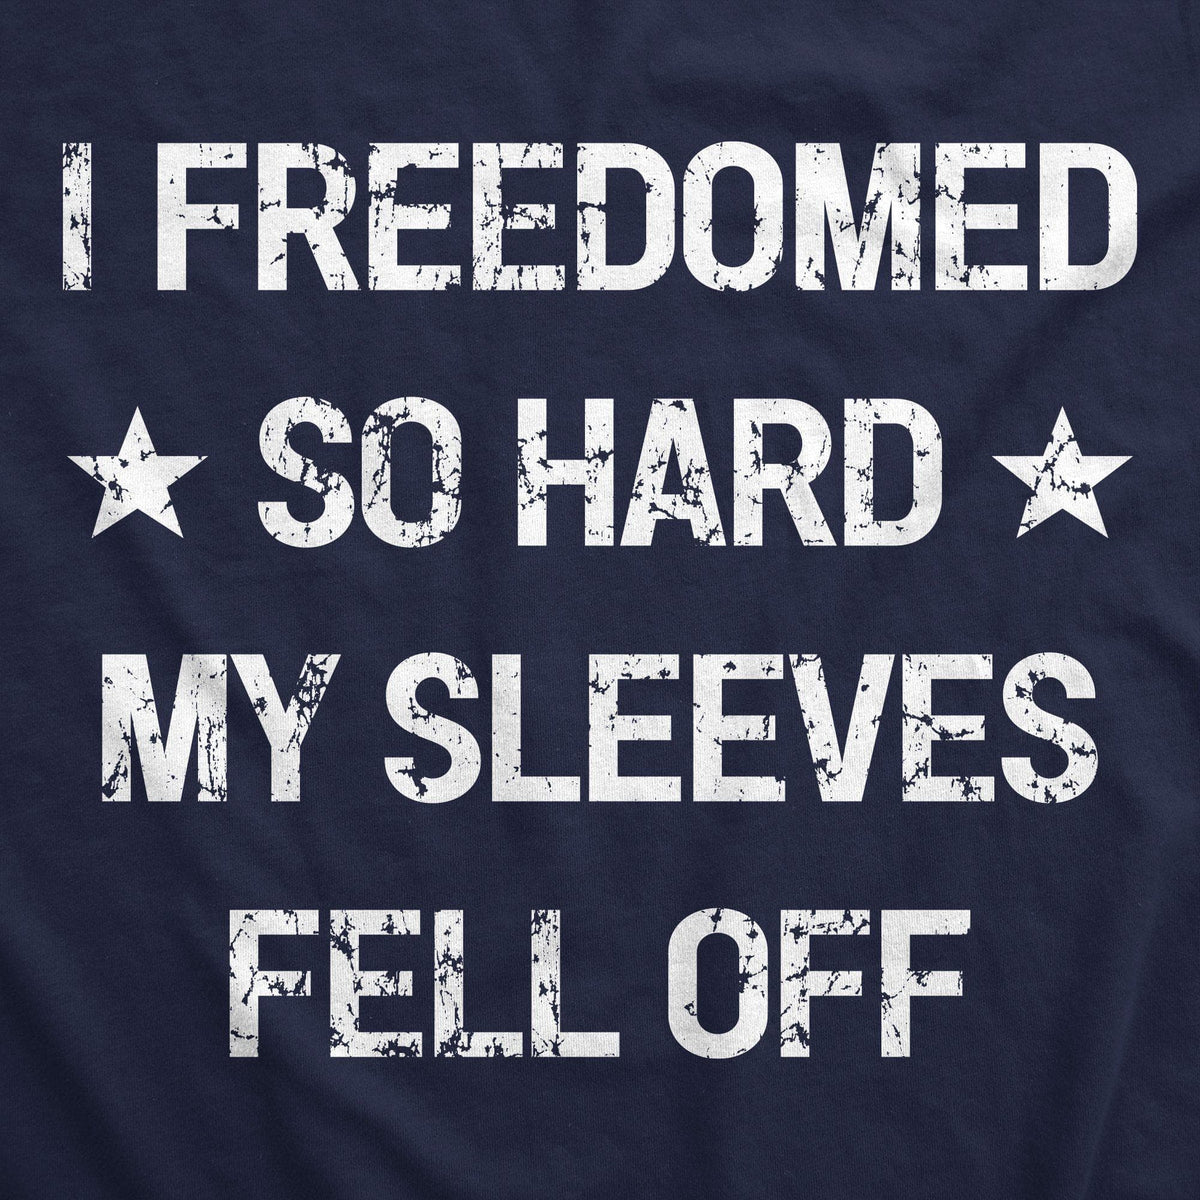 I Freedomed So Hard My Sleeves Fell Off Women&#39;s Tank Top - Crazy Dog T-Shirts